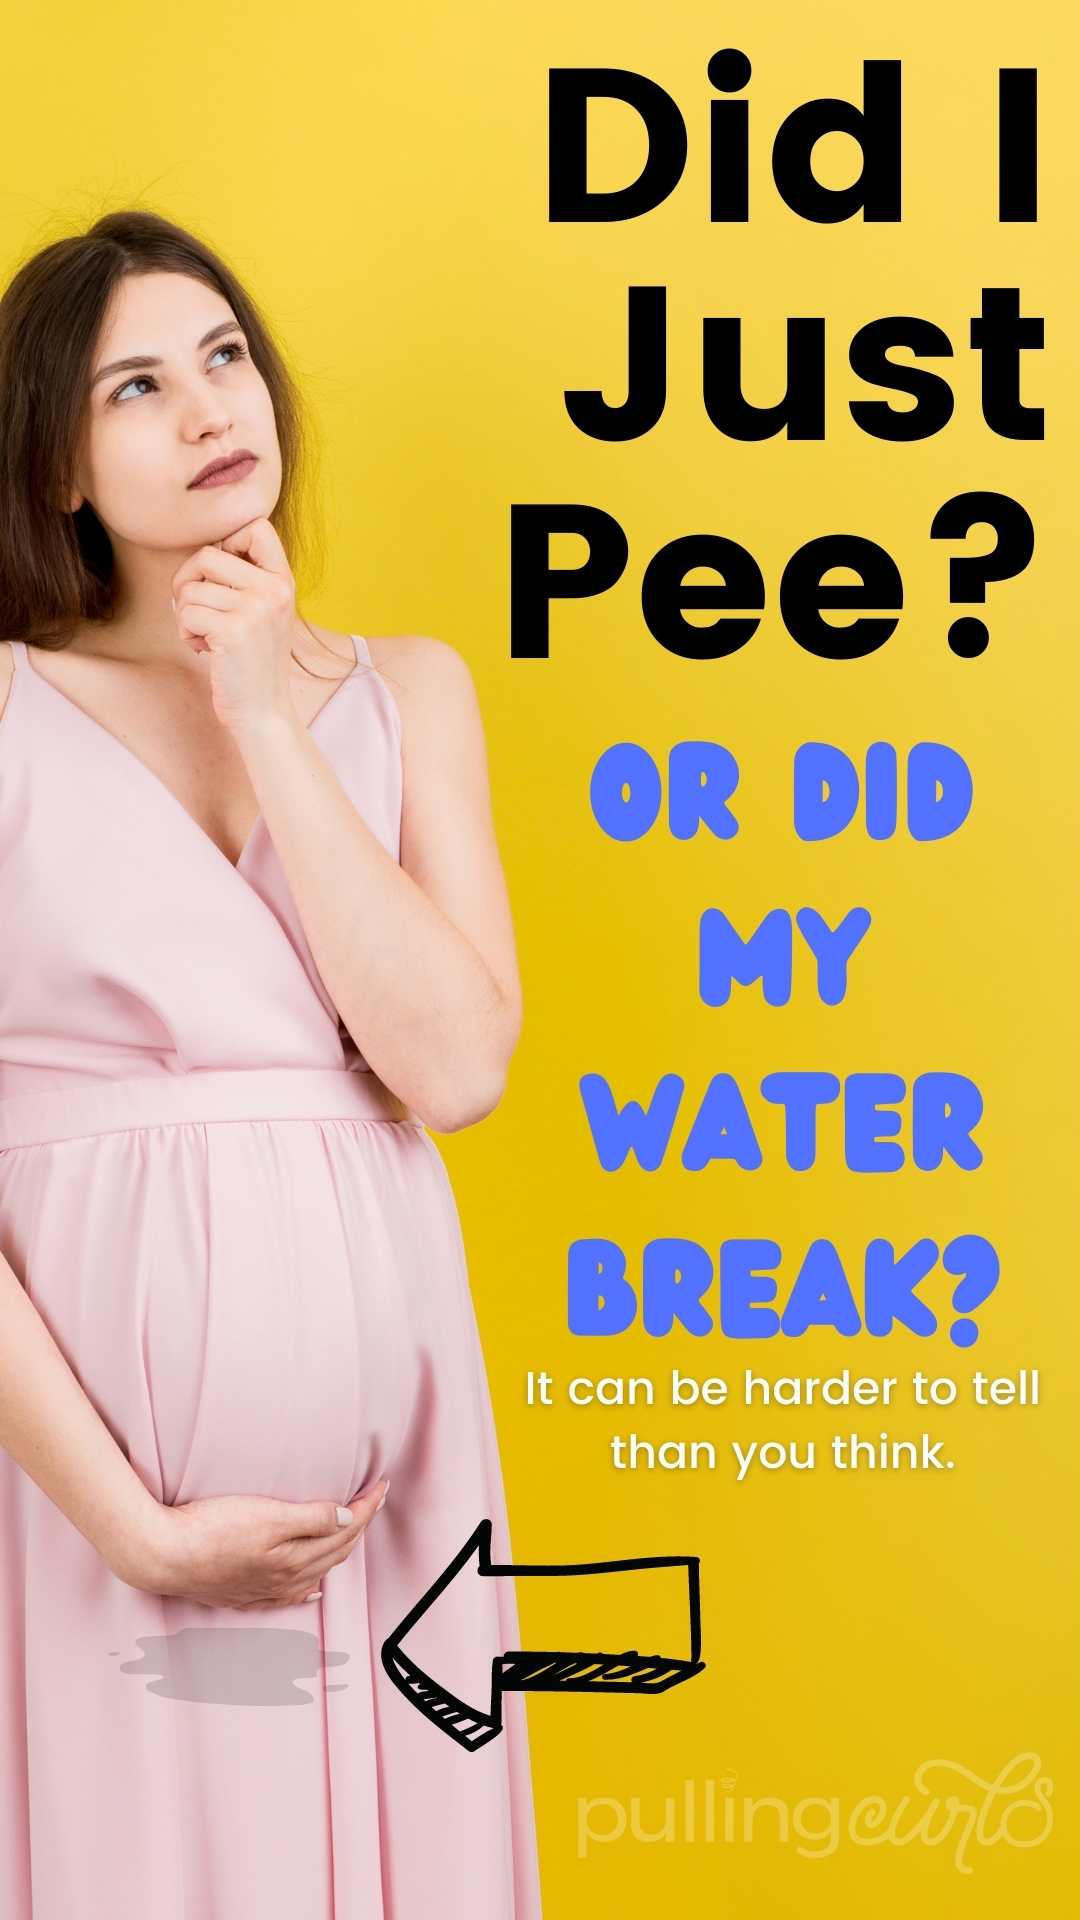 Is this discharge, water breaking, or just pee (tmi pic) - April